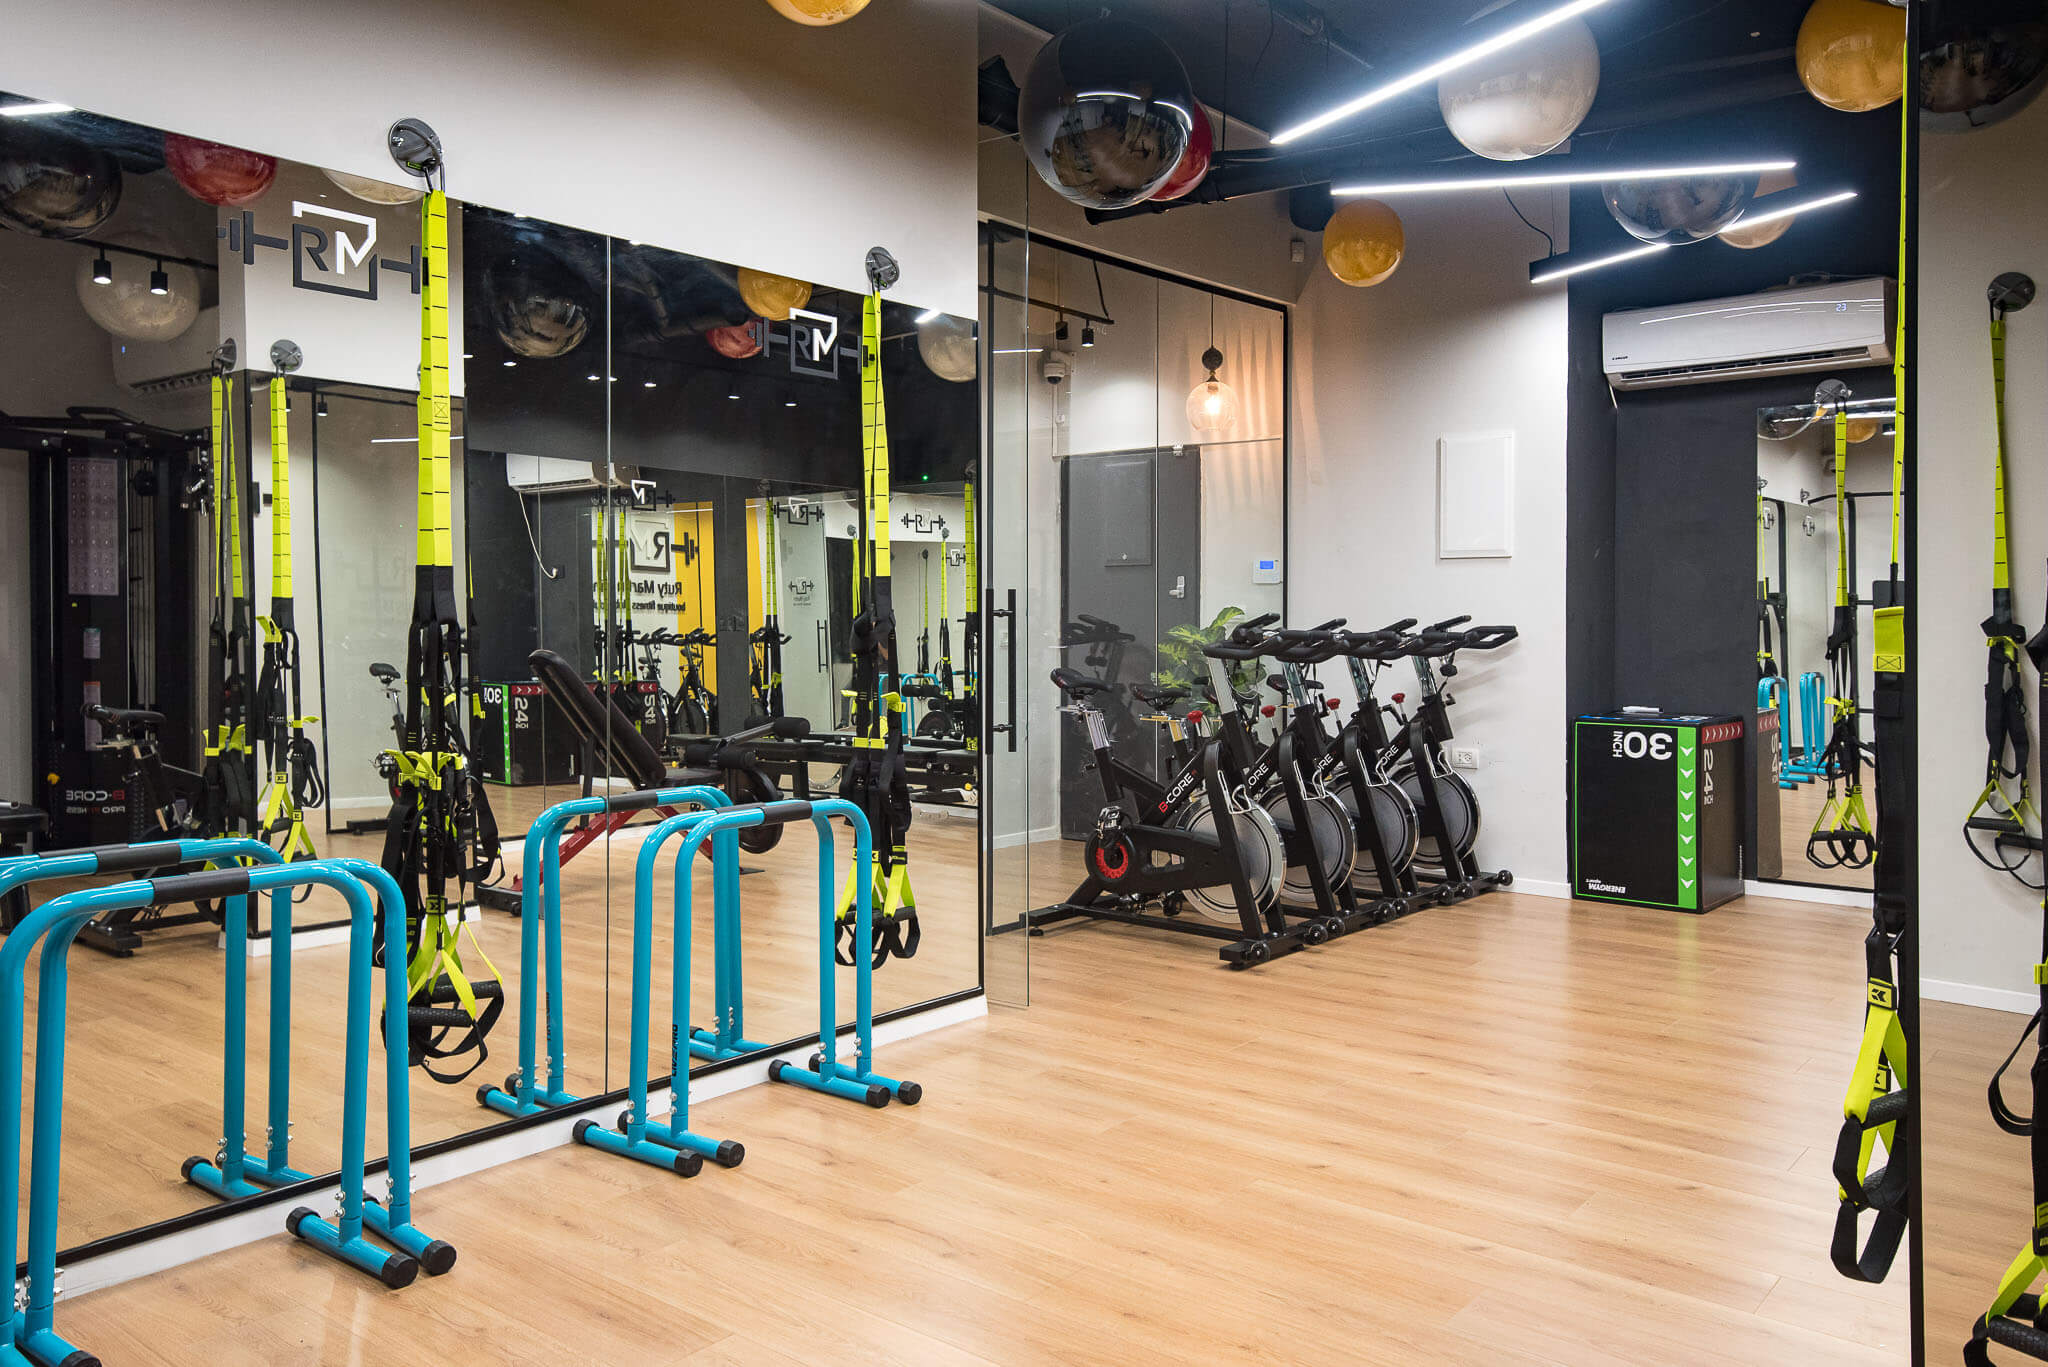 RM boutique fitness club 